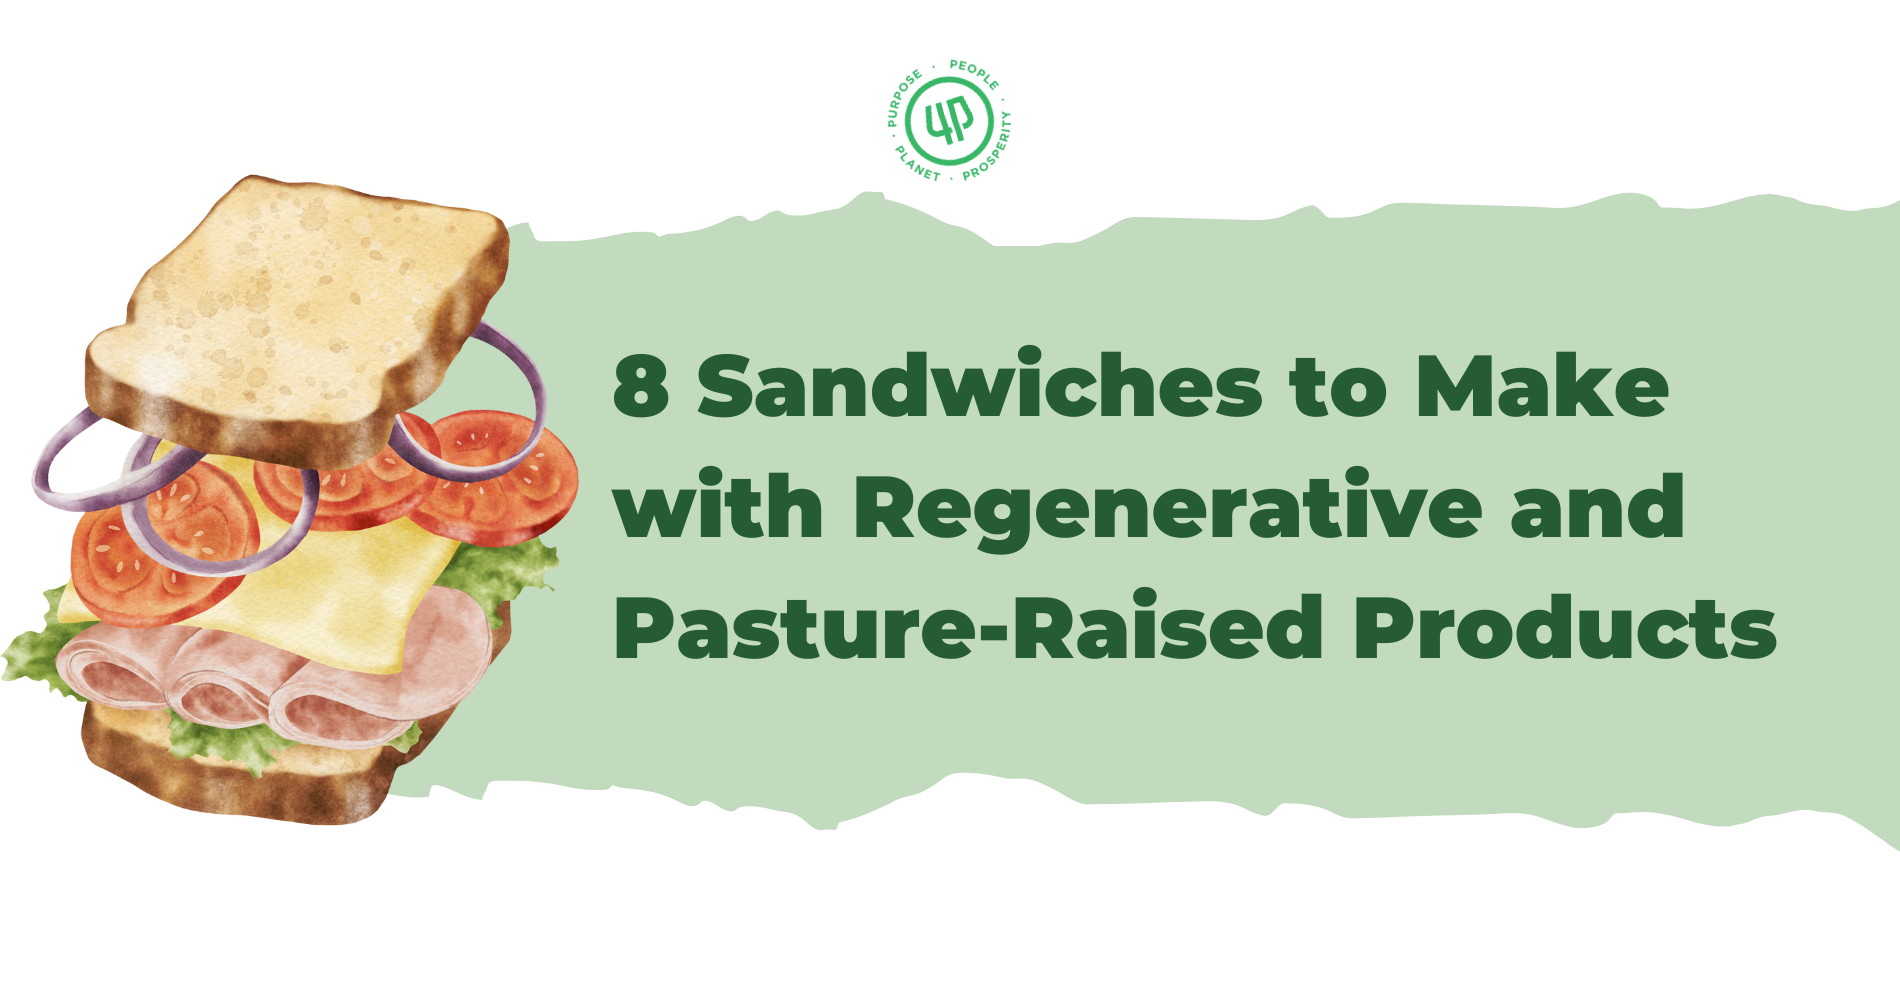 8 Sandwiches to Make with Regenerative and Pasture-Raised Products image